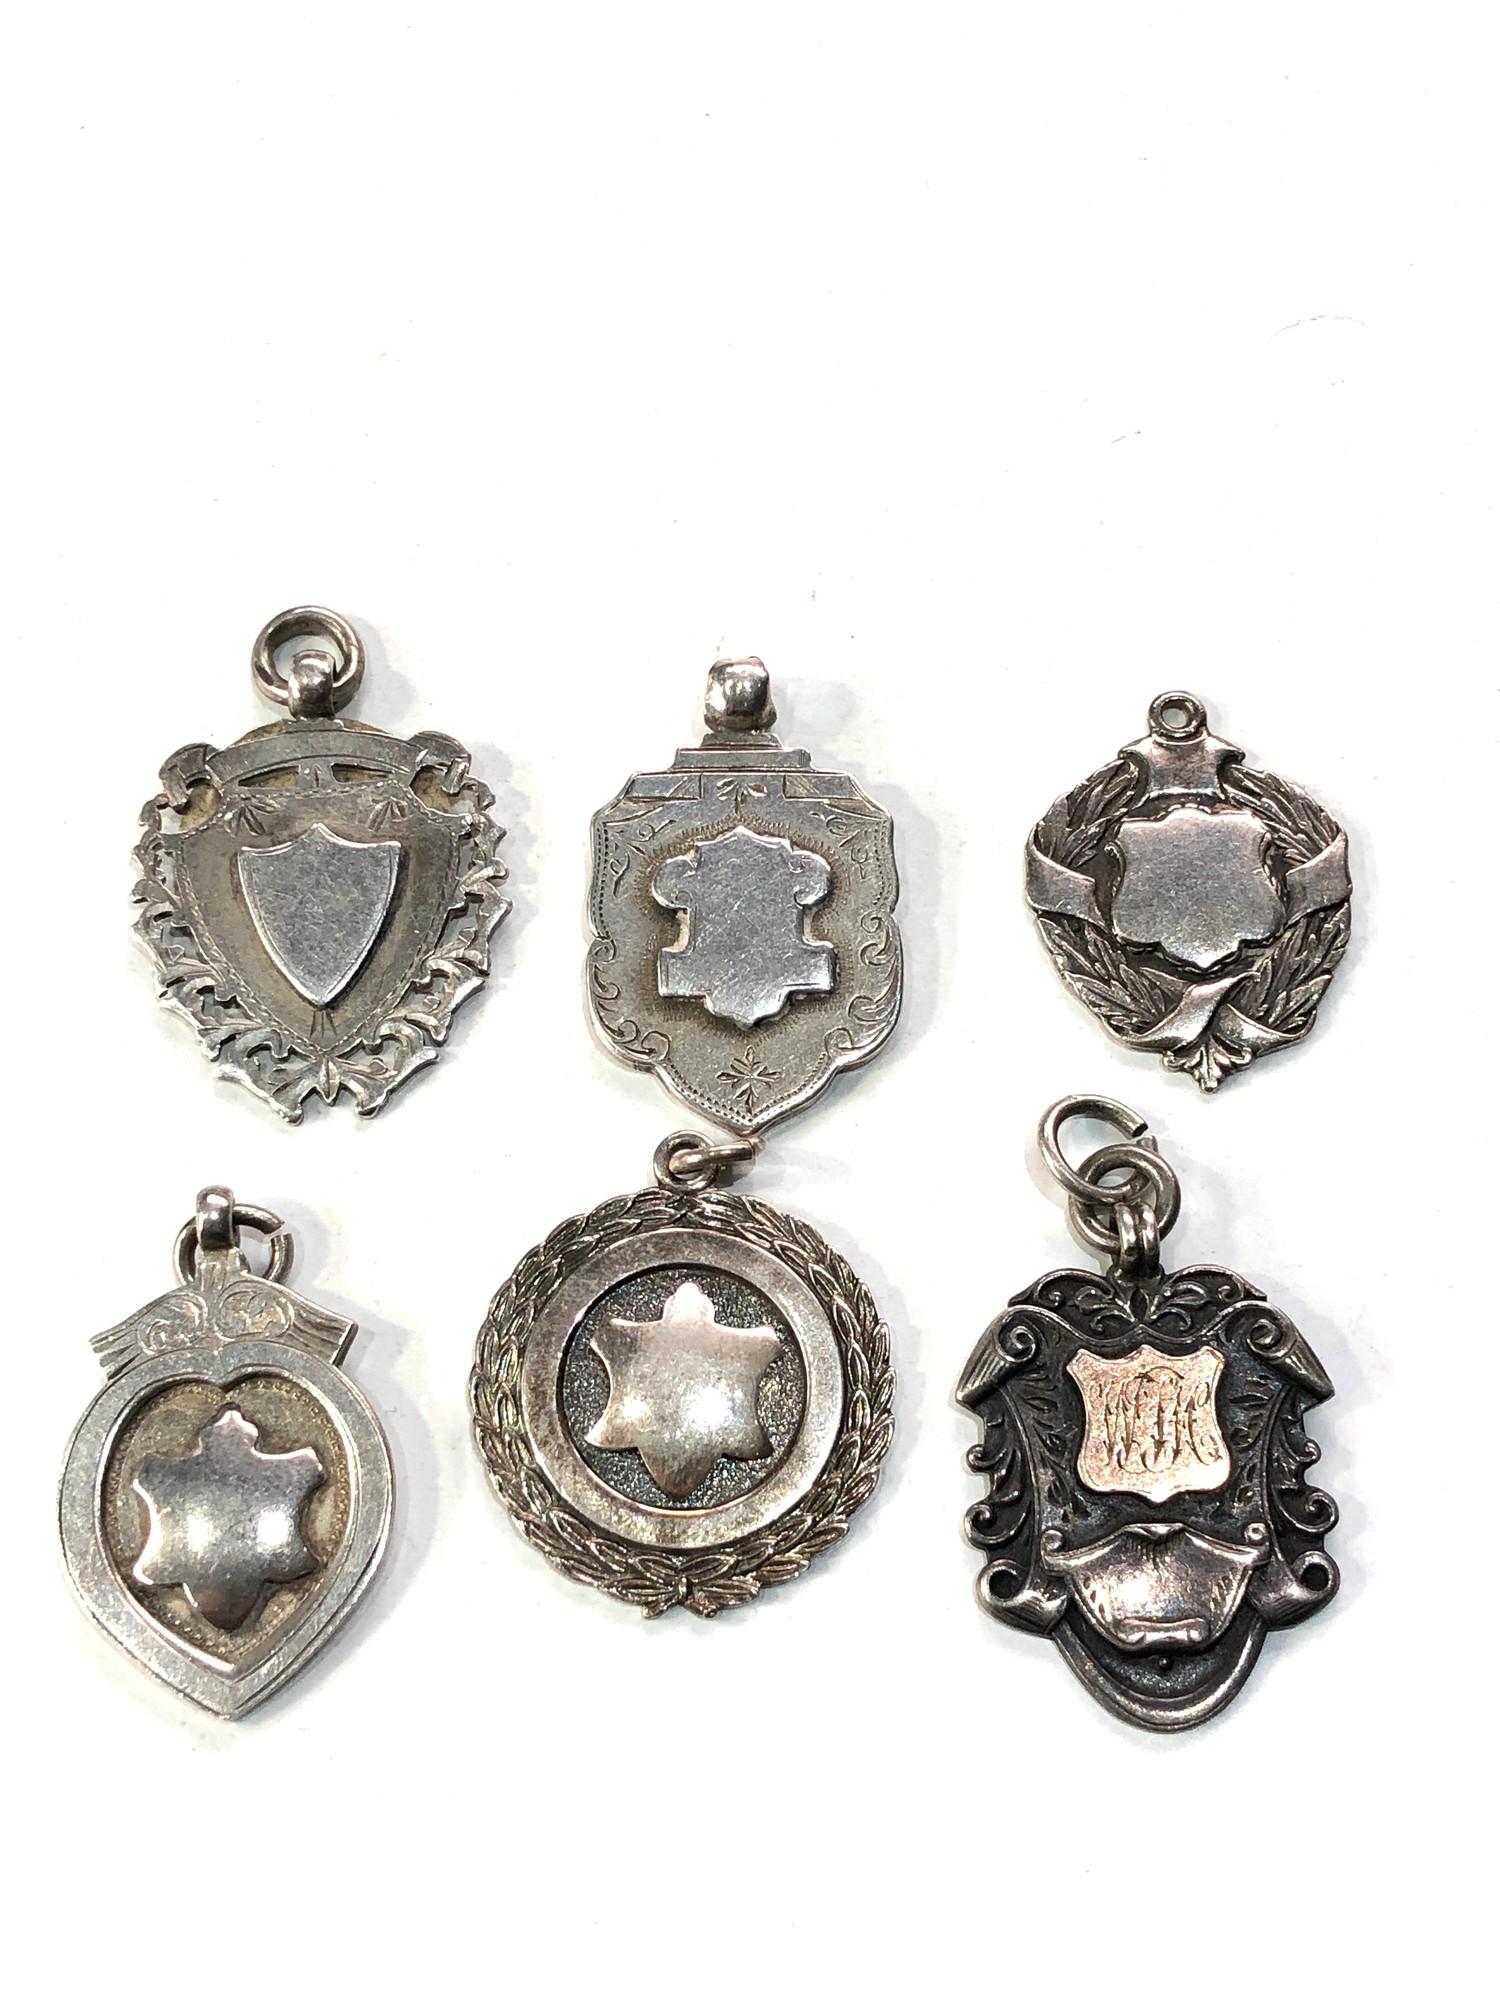 Selection of antique silver pocket watch chain fobs